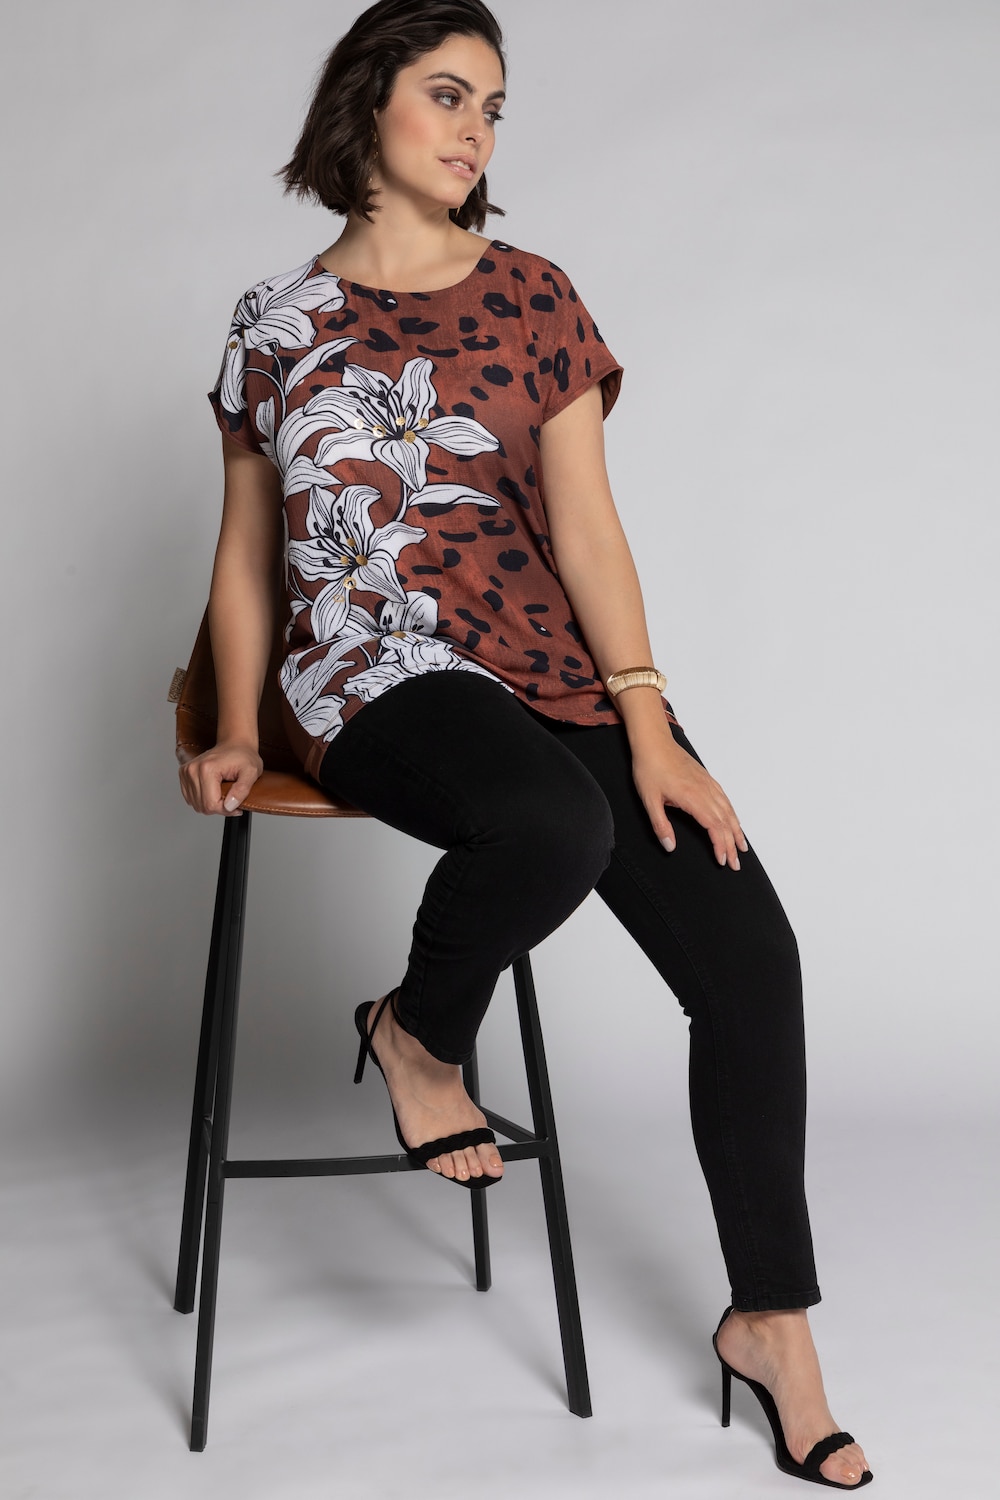 Plus Size Mixed Fabric Floral Leopard Print Round Neck Top, Woman, brown, size: 20/22, polyester/viscose, Ulla Popken